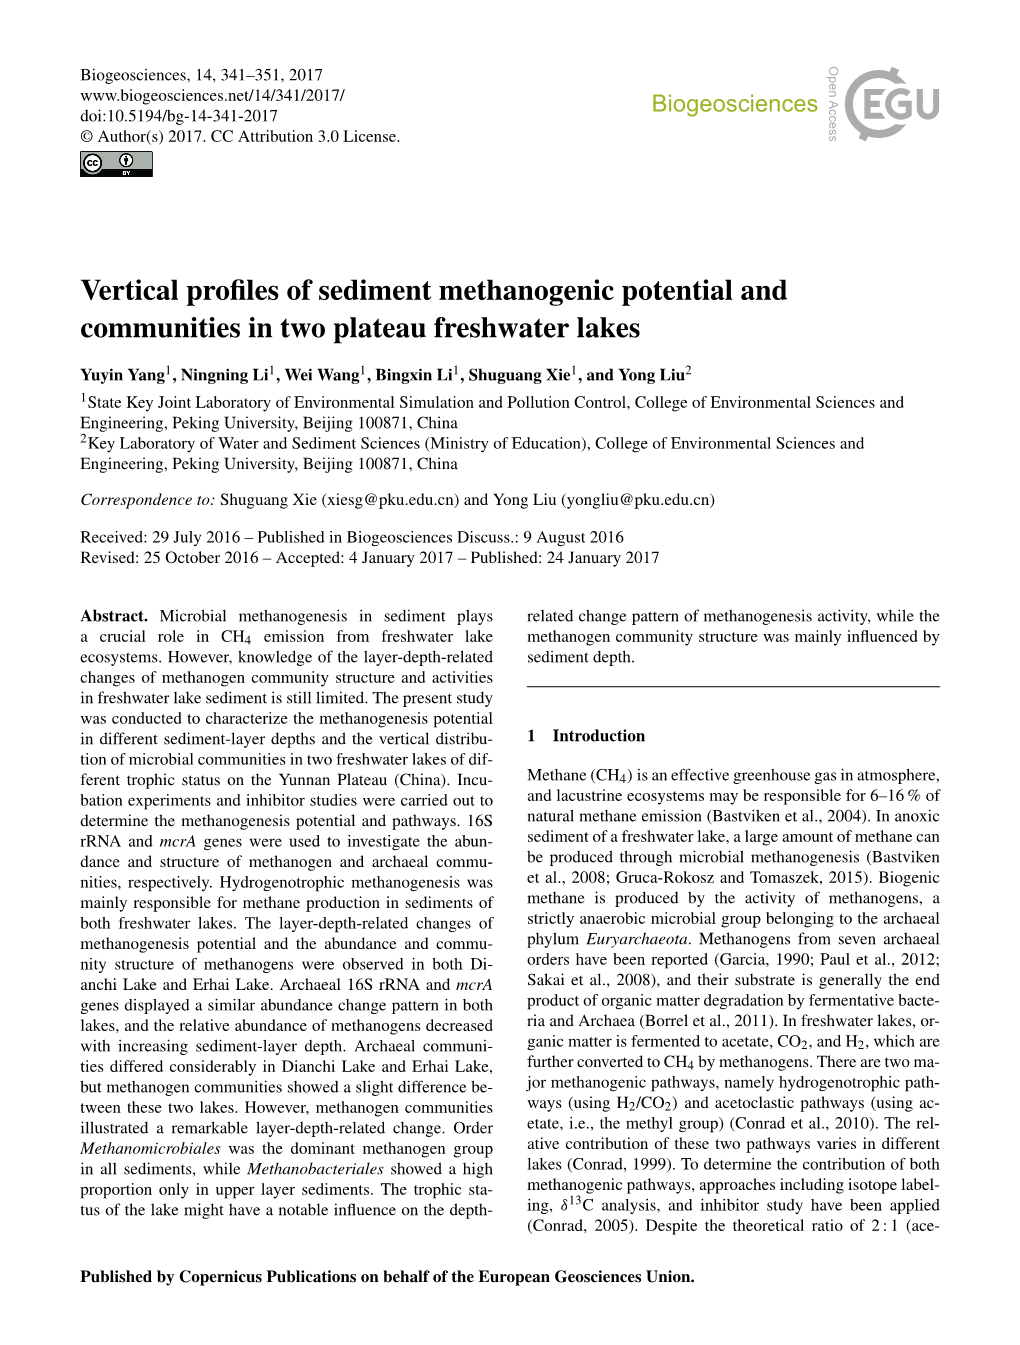 Vertical Profiles of Sediment Methanogenic Potential And